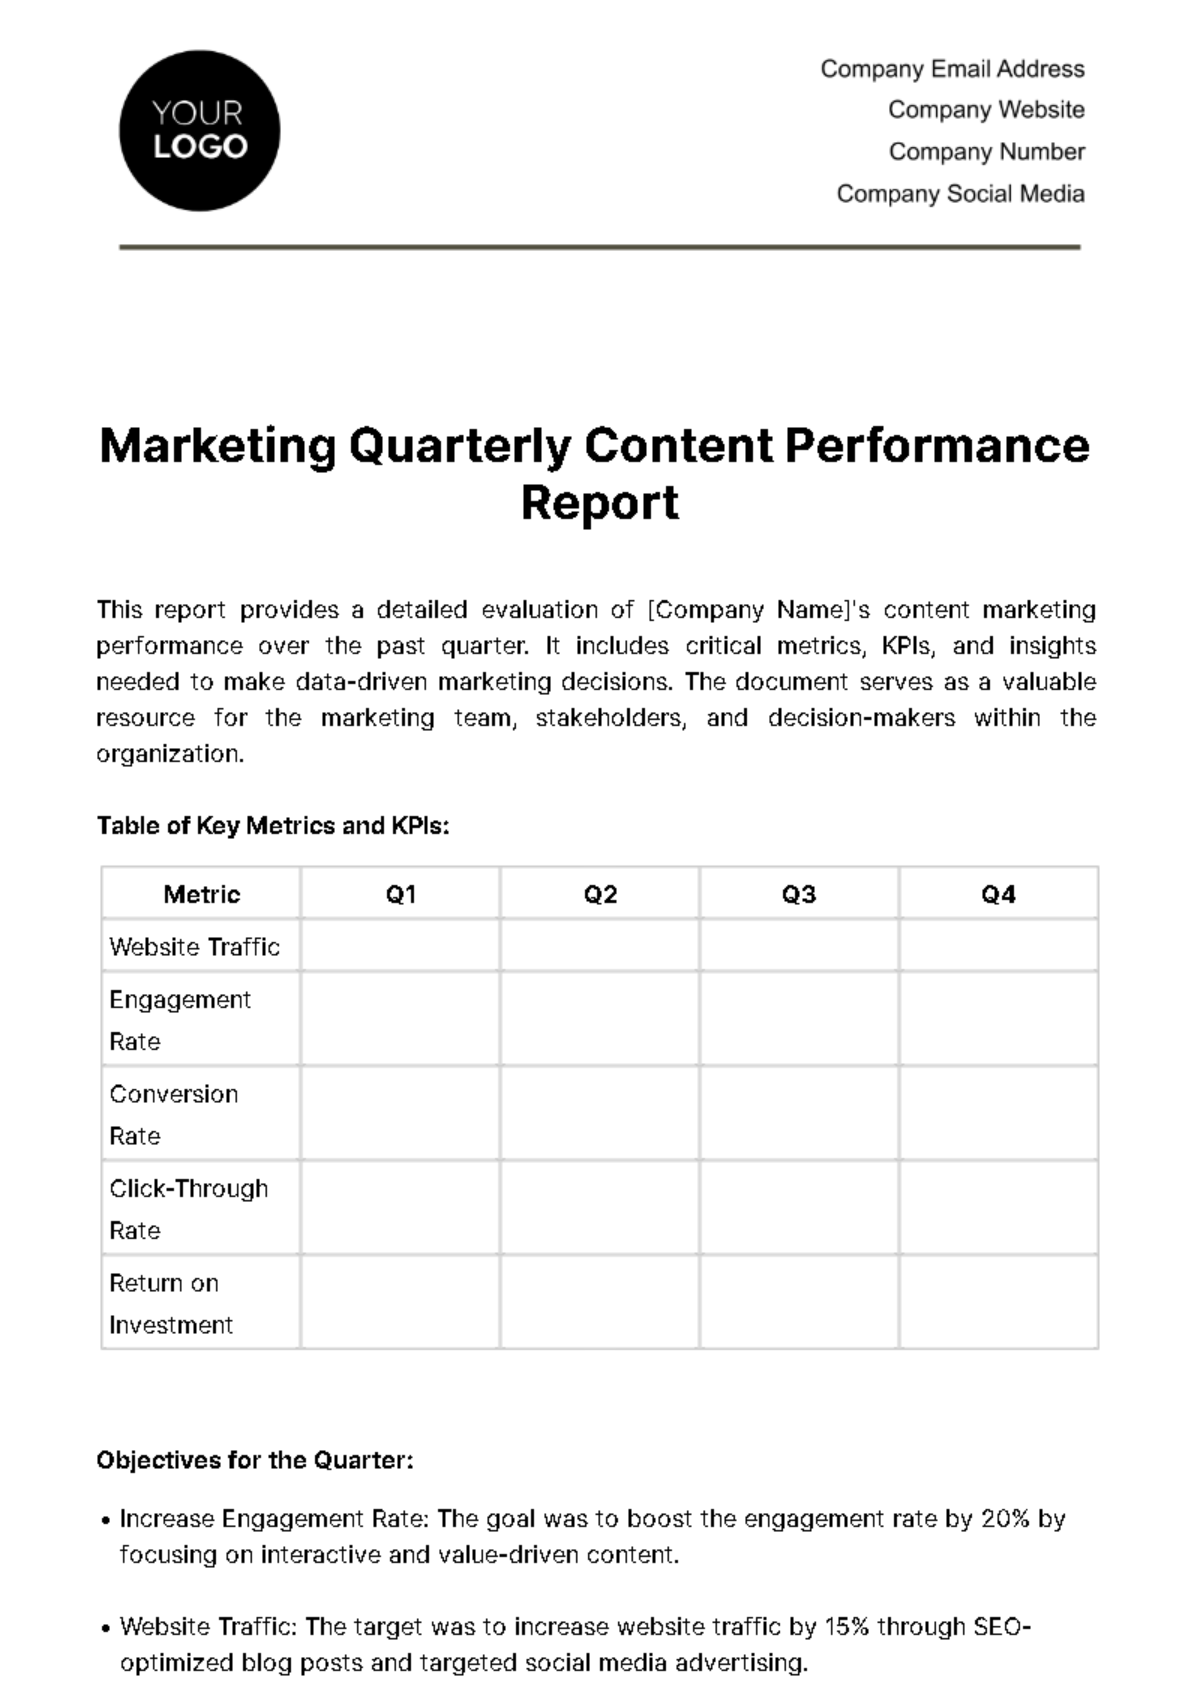 Marketing Quarterly Content Performance Report Template